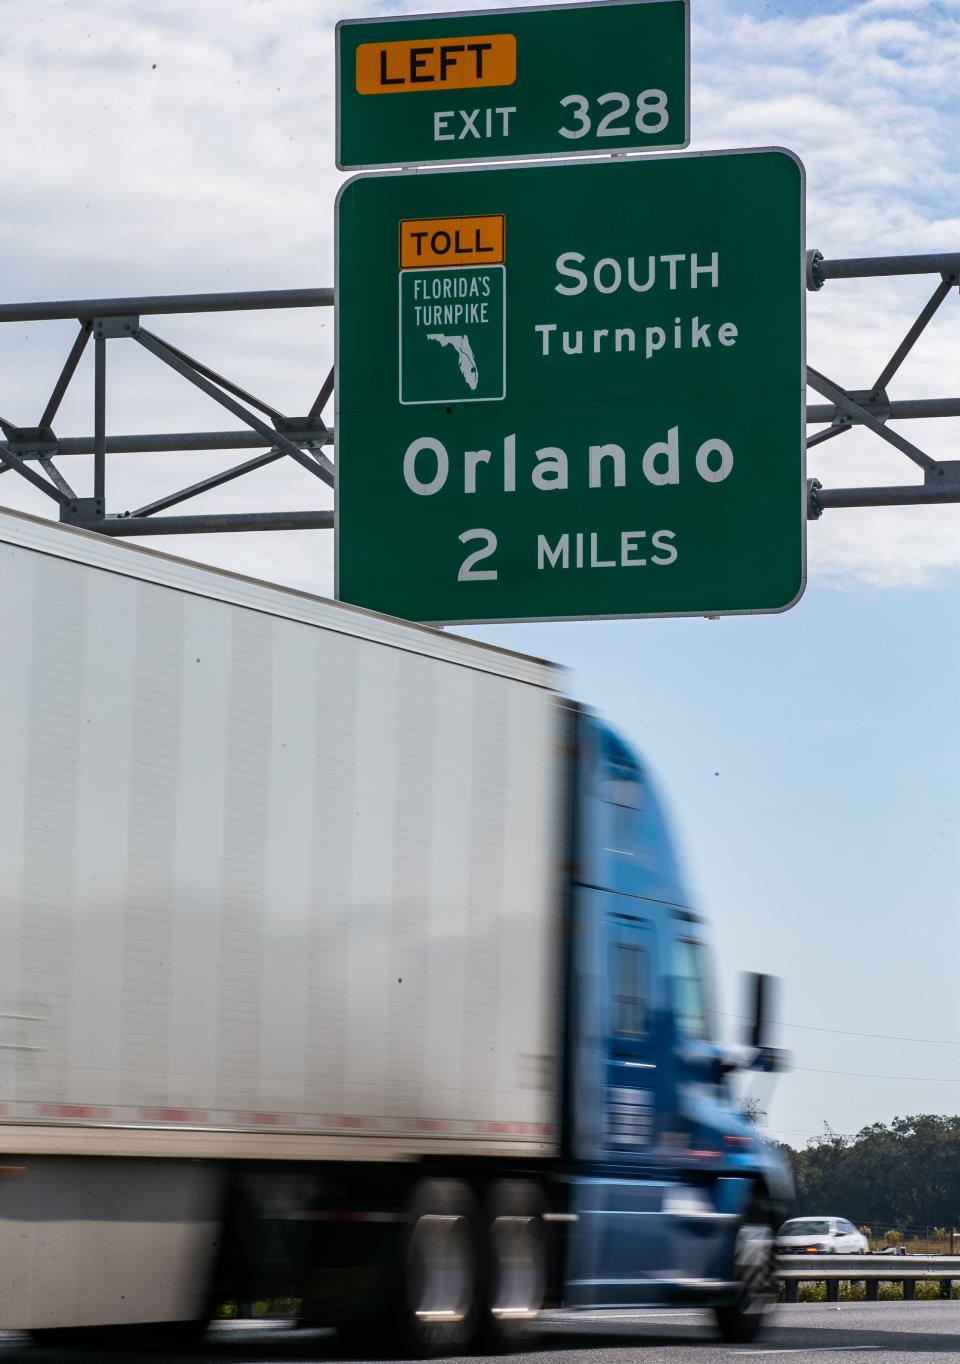 The Florida Turnpike's northern terminus is now Wildwood, near where this photo was taken on Dec. 8. The state is considering a northern extension to U.S. 19 near Florida's west coast.